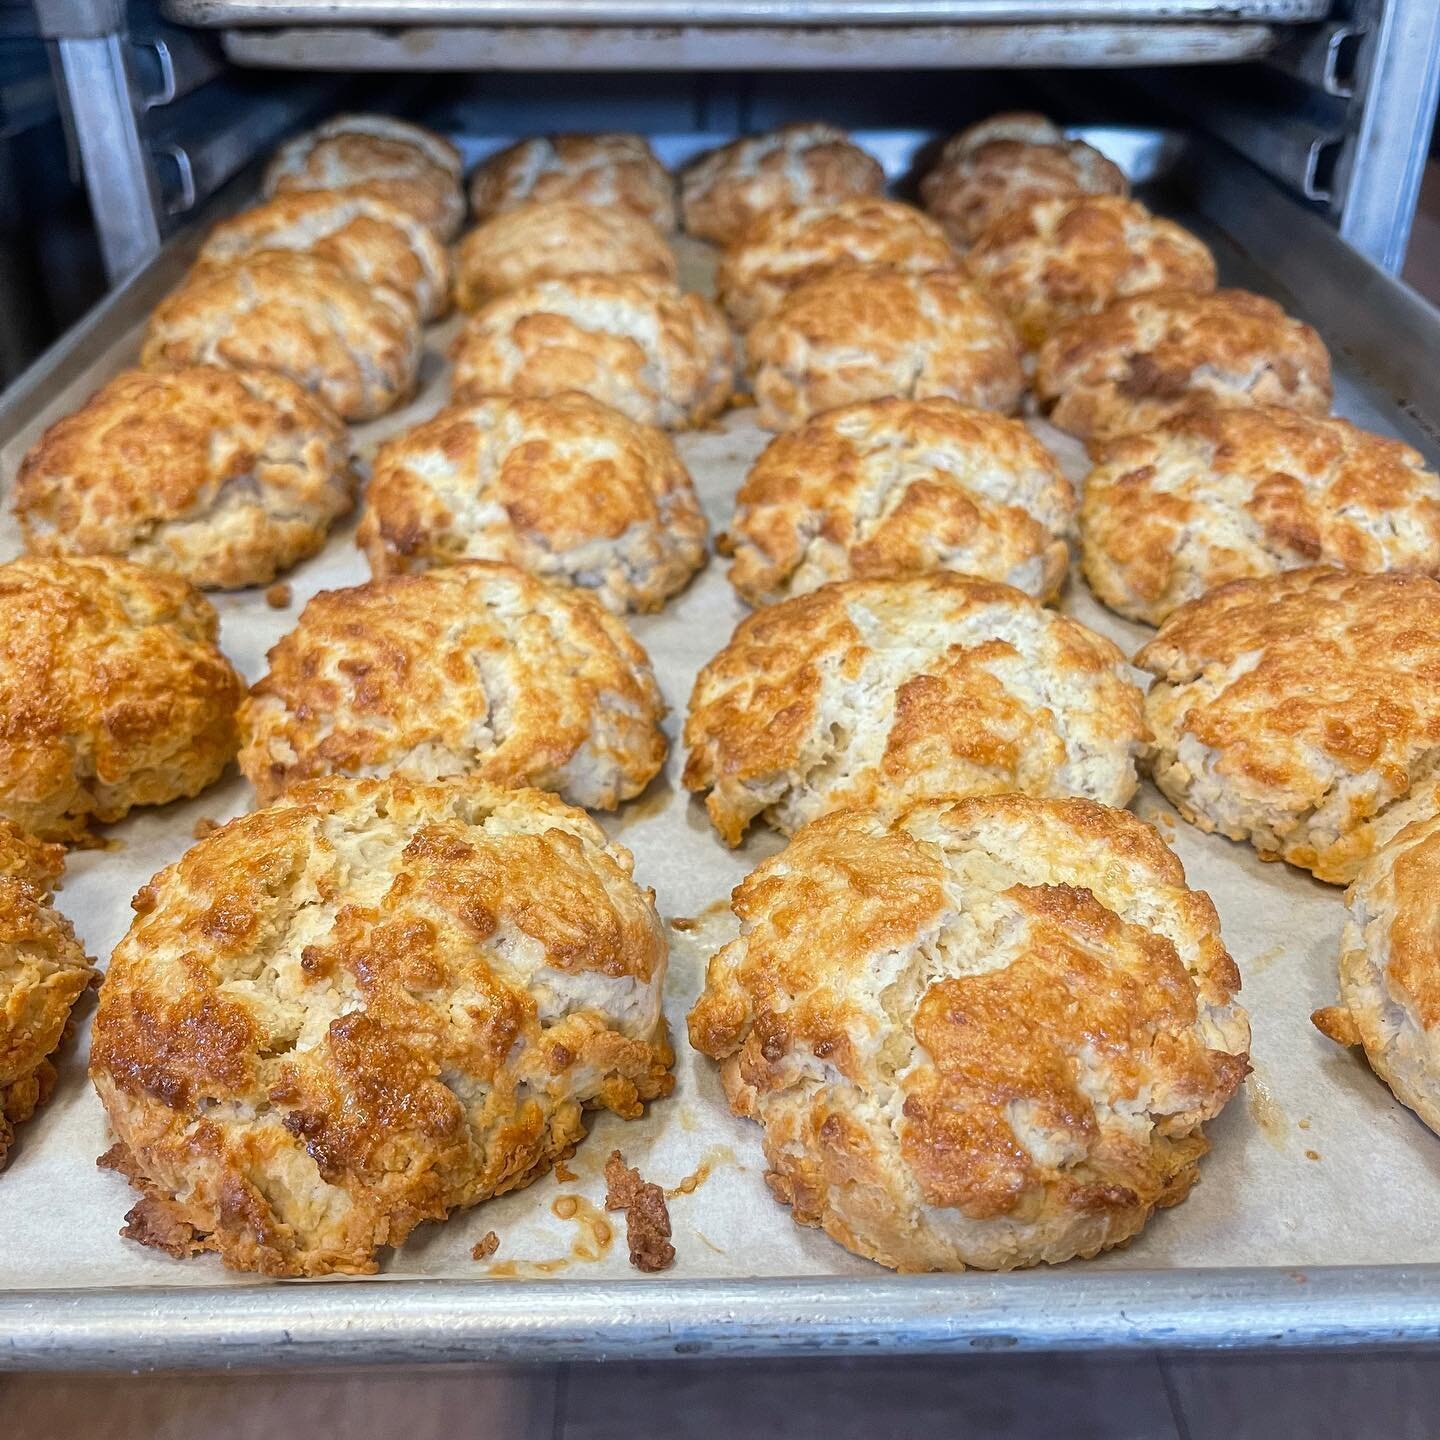 Fresh house made biscuits for tomorrows Biscuit &amp; Gravy special! Featuring @northhollowfarm ground beef and pork!! 😍